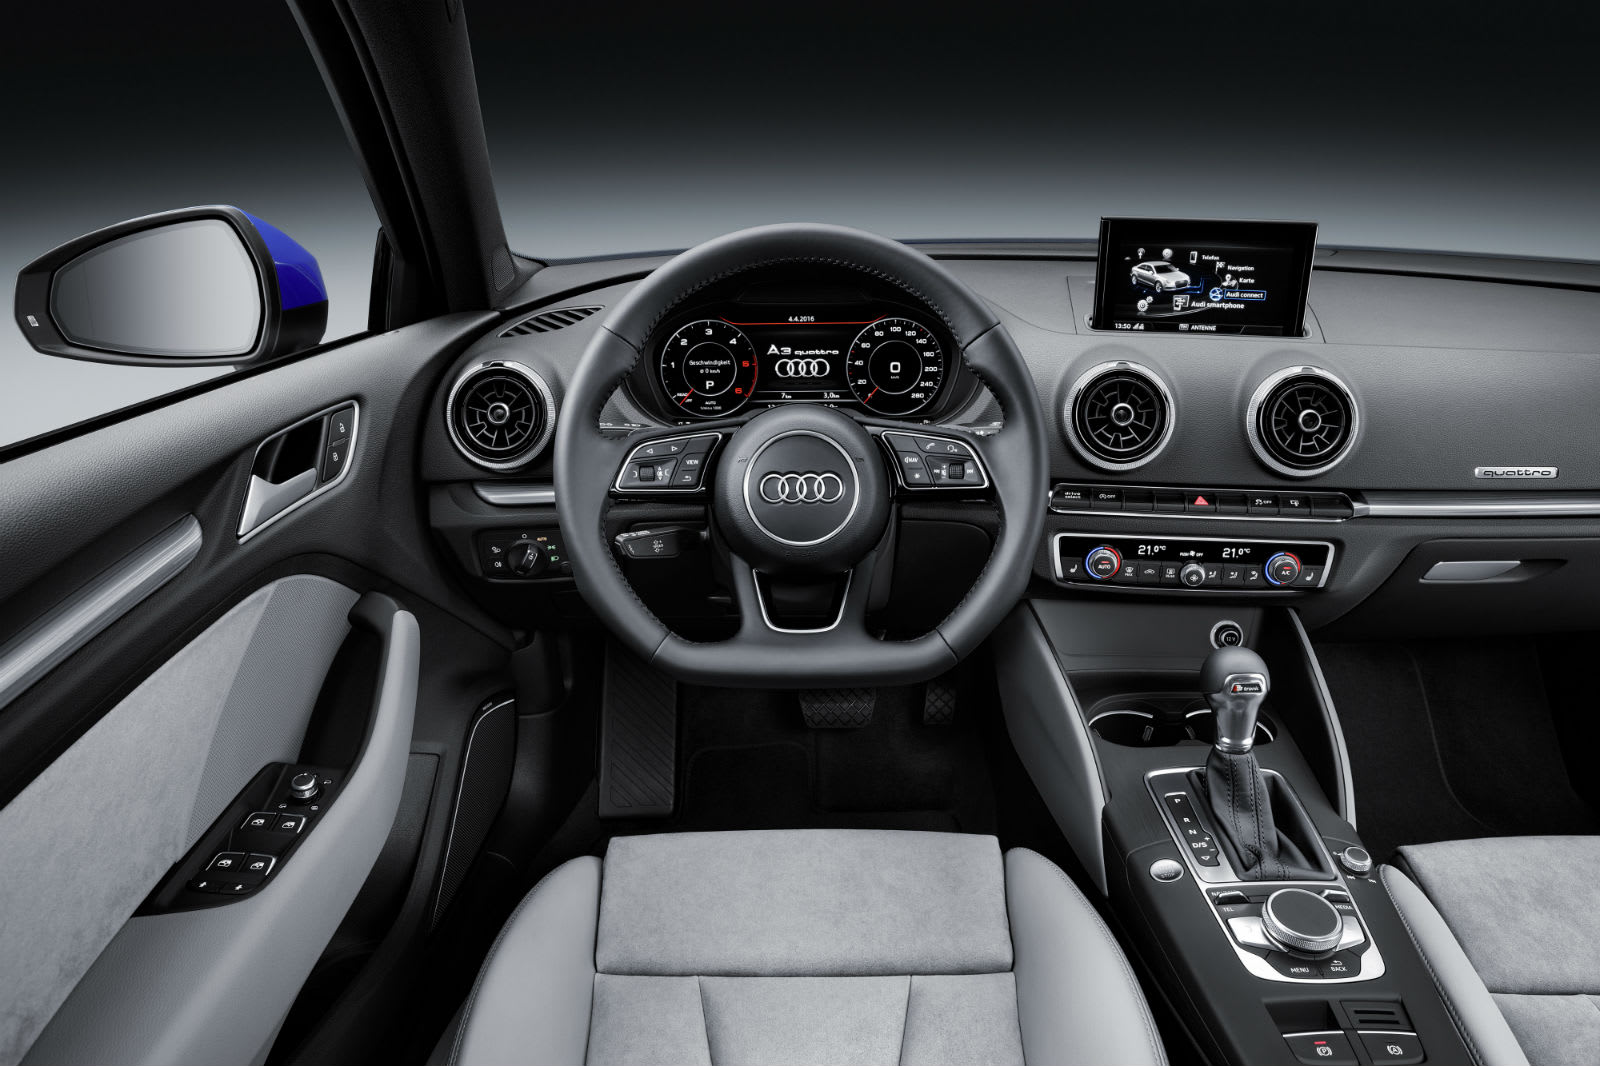 Audi's latest models add Amazon Music to the dashboard